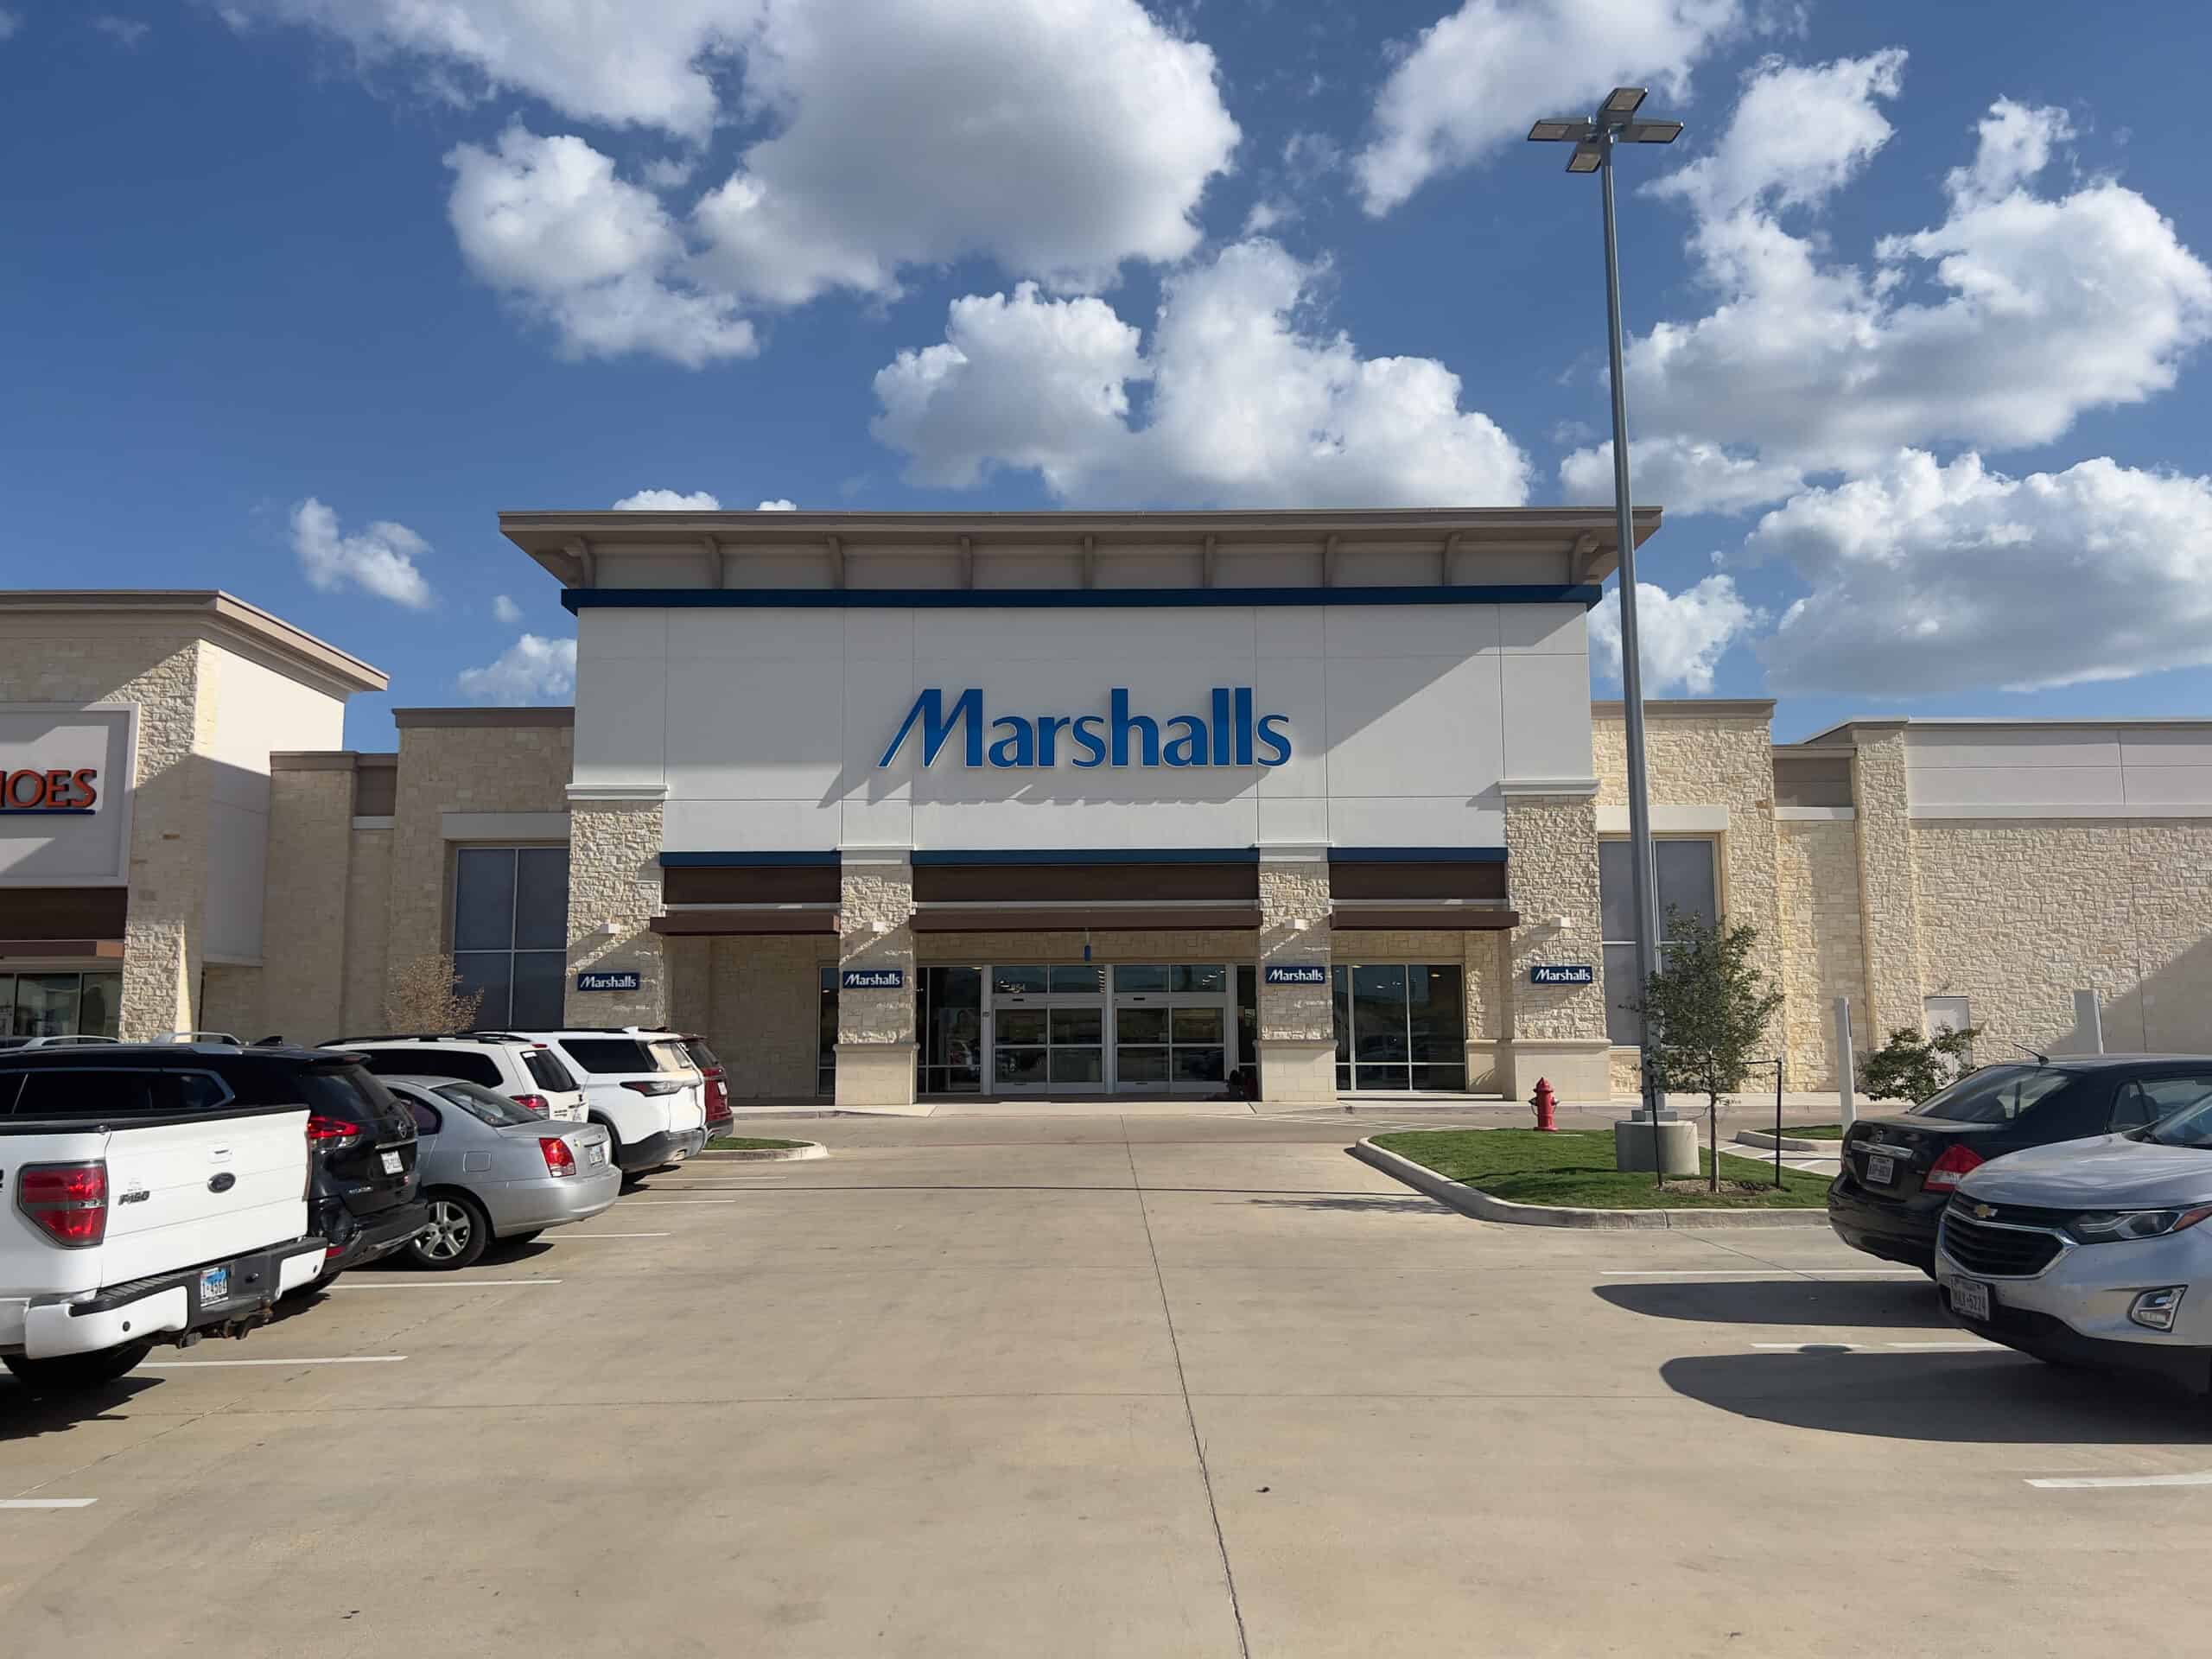 Storefront of Marshalls store at Brenham Crossing by Piper McCorkle